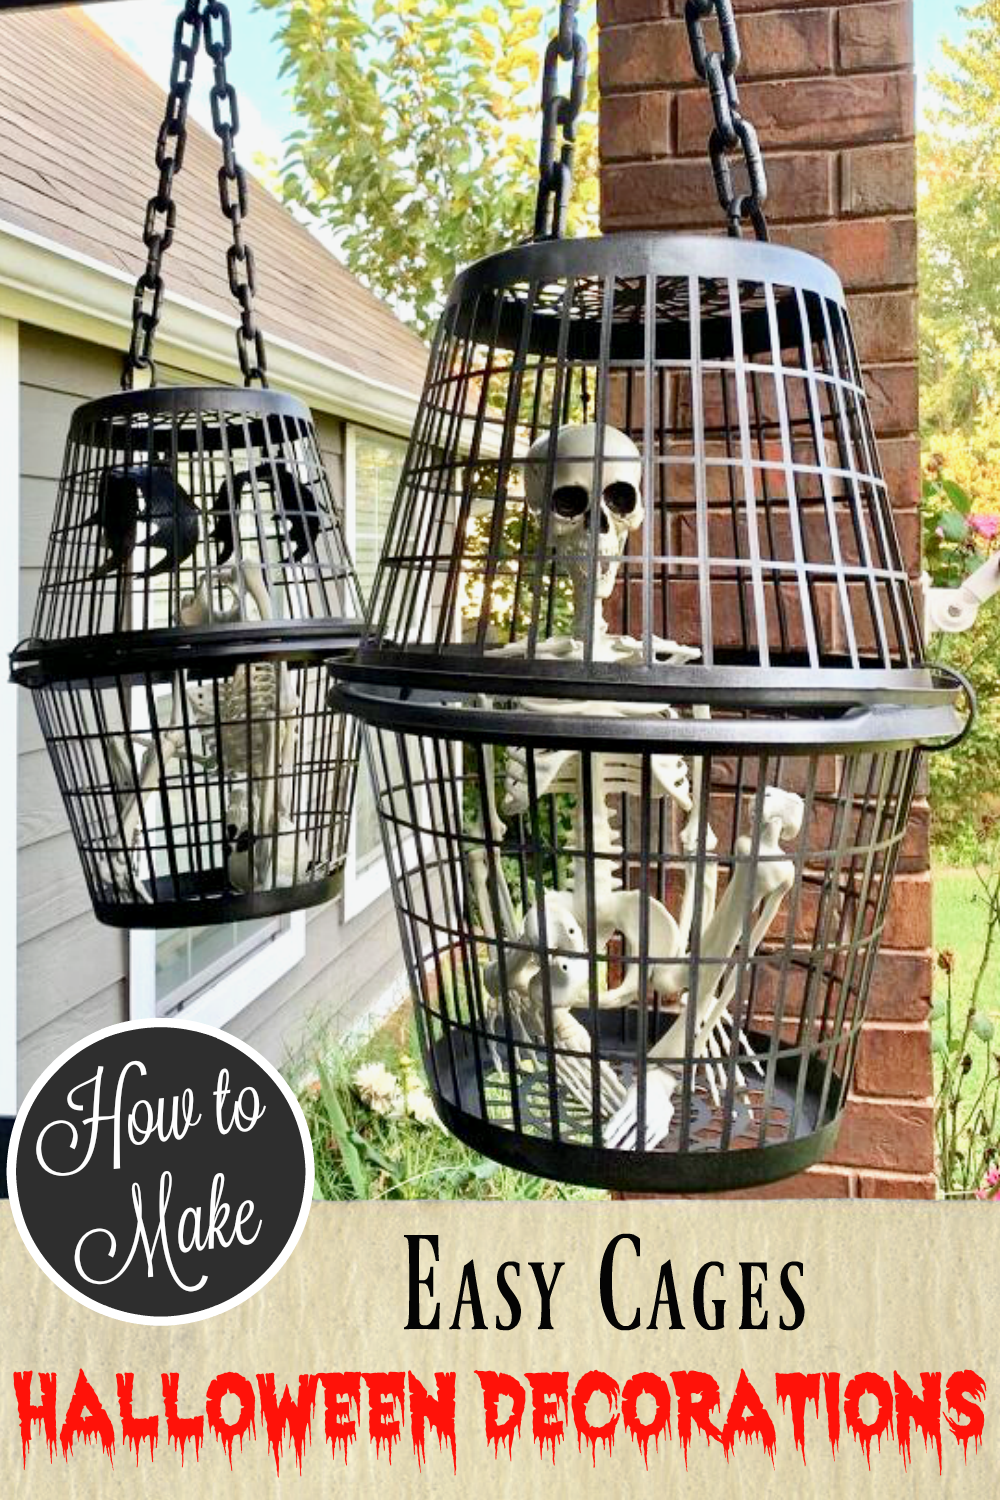 Take your skeletons out of the closet!  How to Make Cage Halloween Decorations!  Easy Halloween DIY! - Take your skeletons out of the closet!  How to Make Cage Halloween Decorations!  Easy Halloween DIY! -   17 diy Dollar Tree decorations ideas